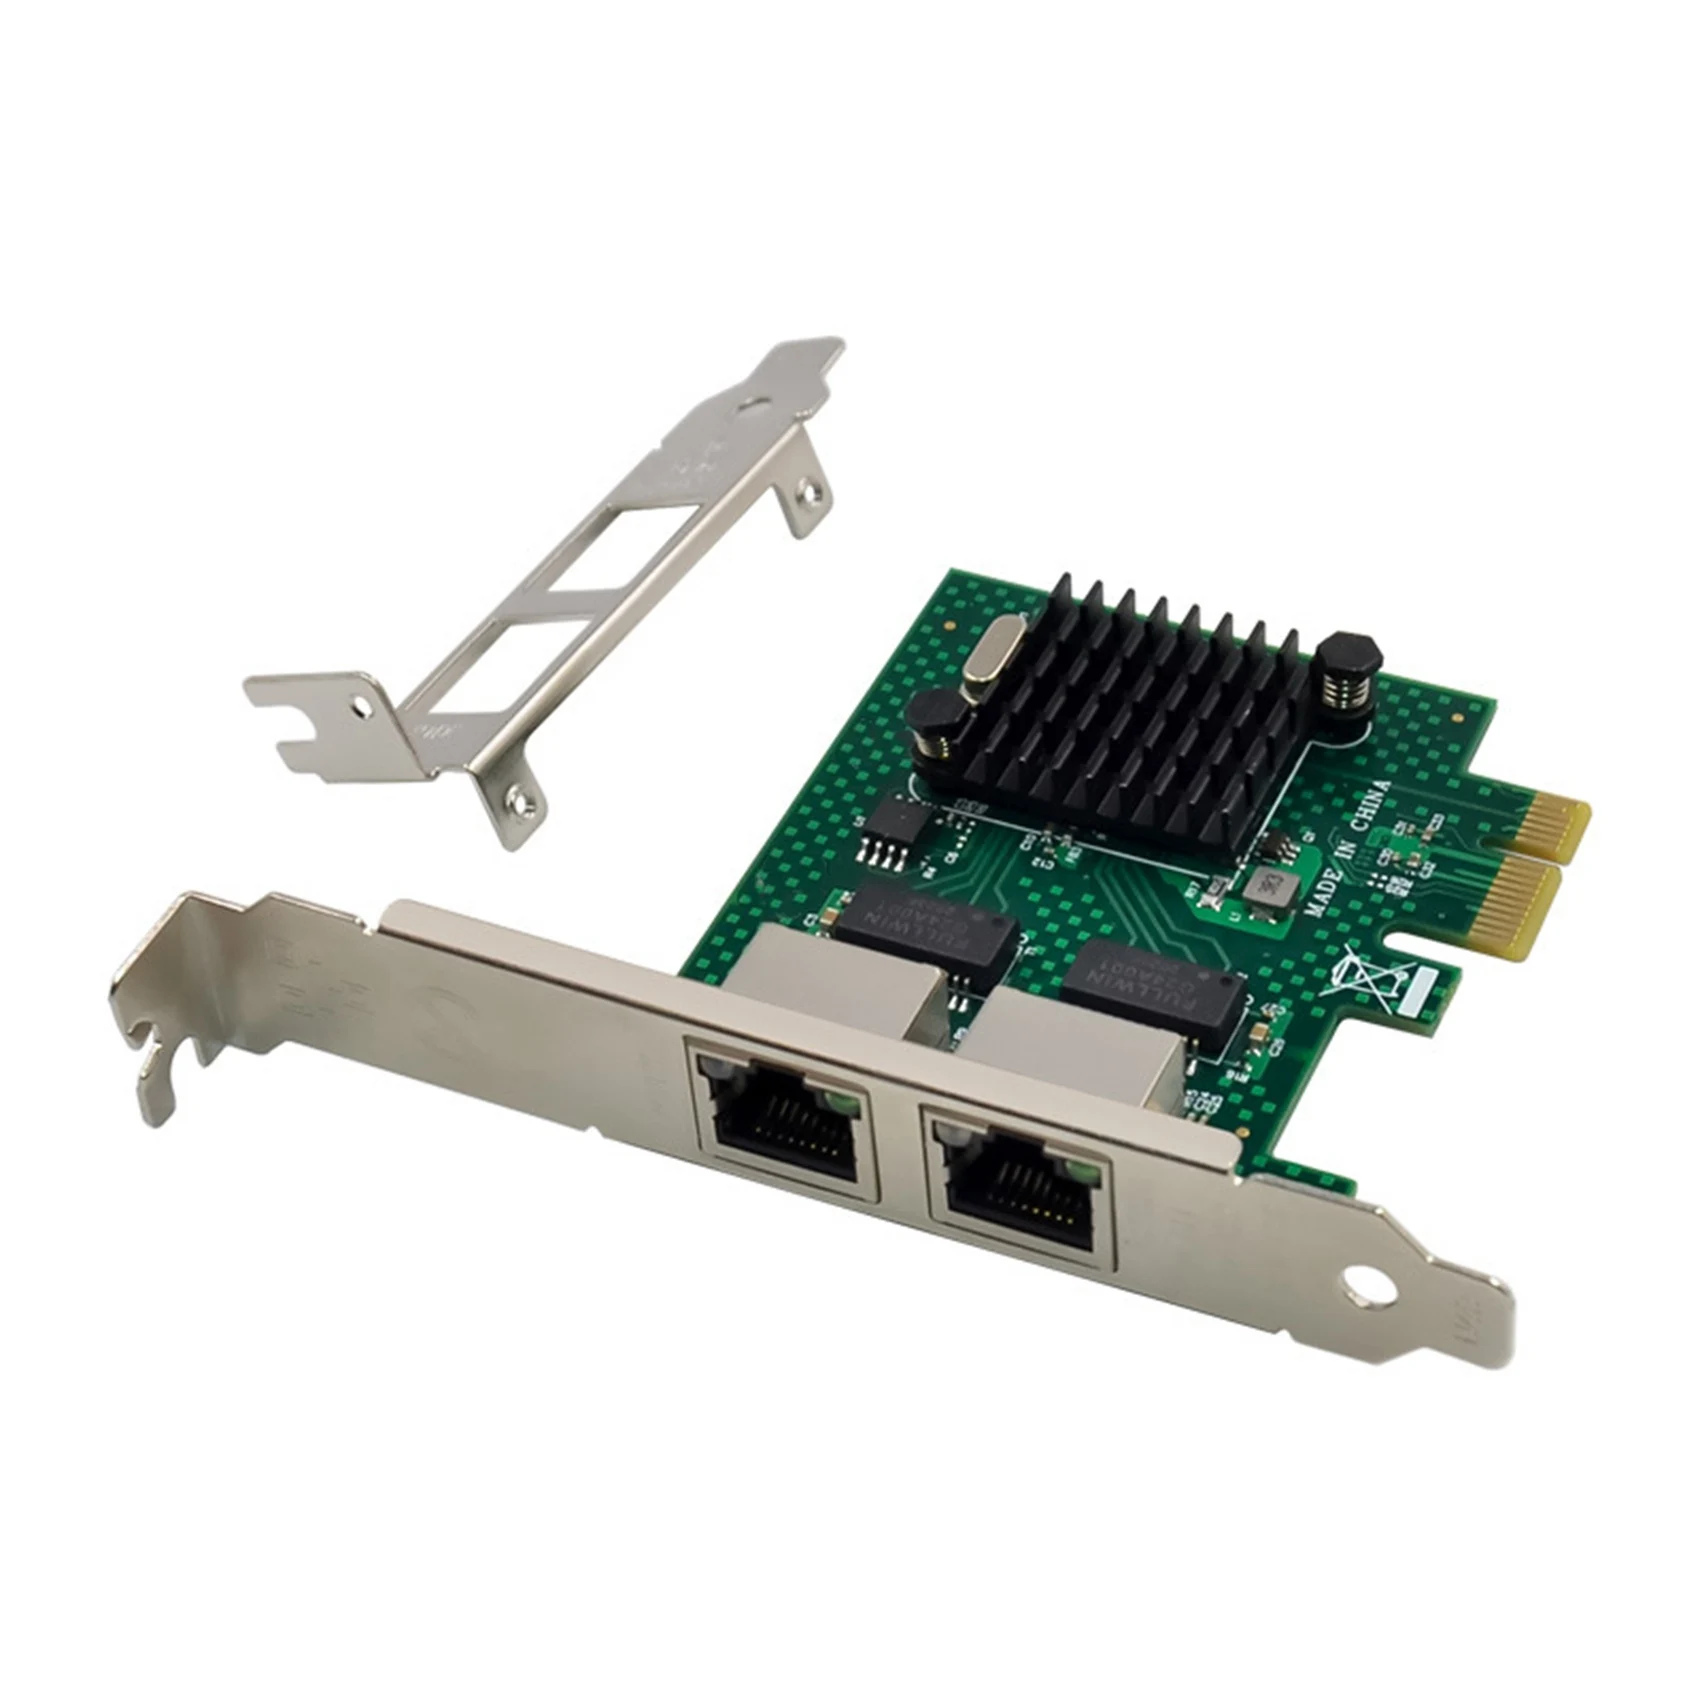 

BCM5718 Gigabit Server Network Card PCI Express X1 Dual Port Network Adapter Card Compatible with WOL PXE